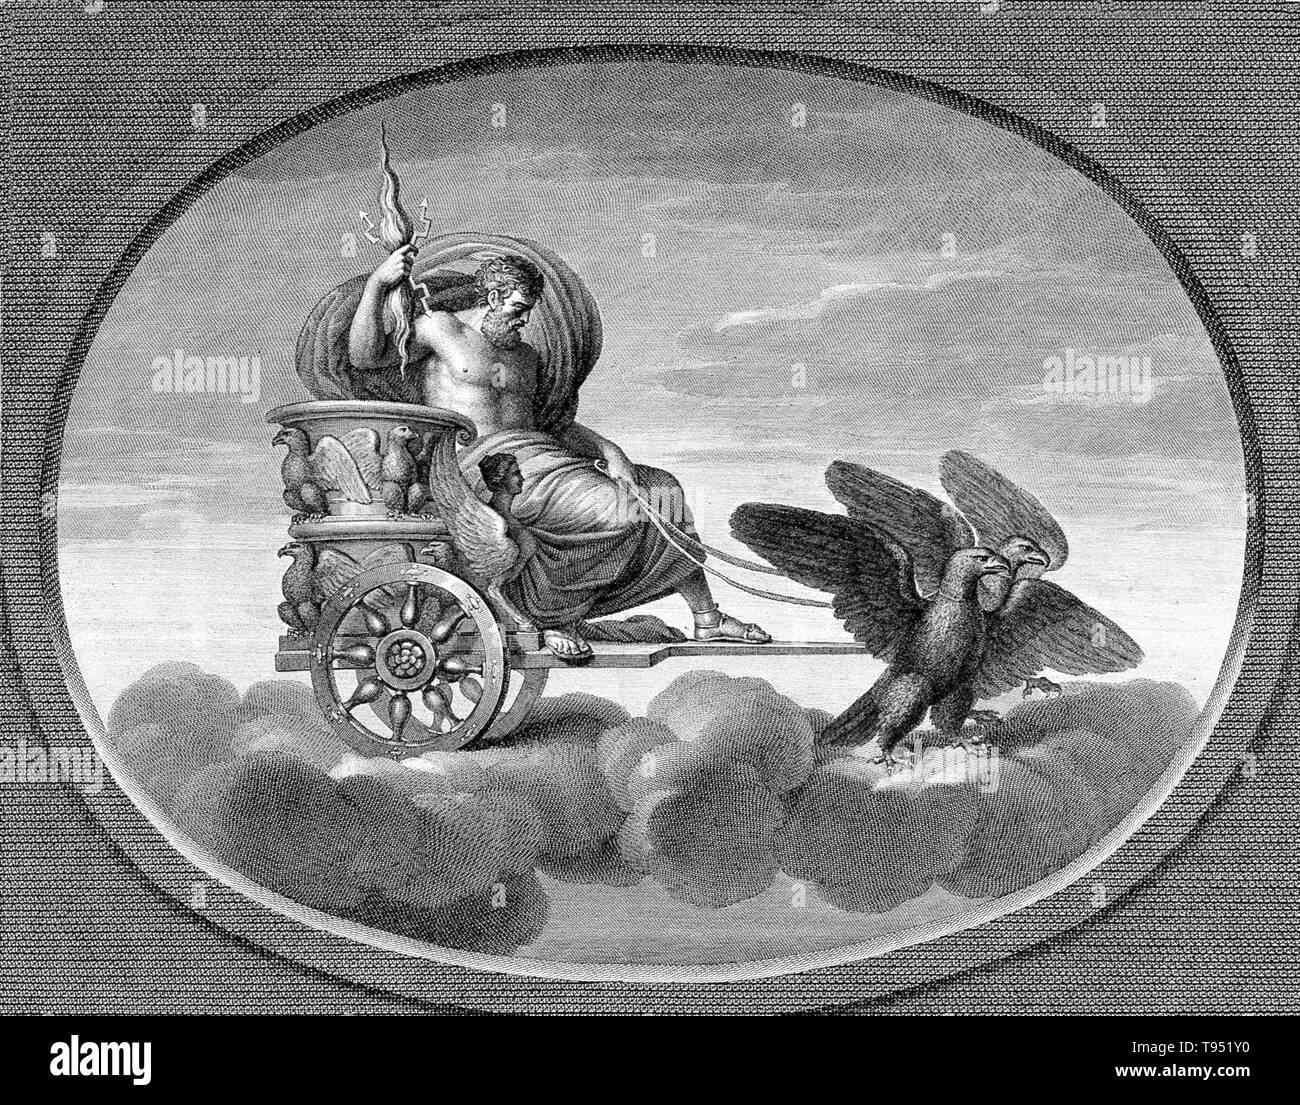 Jupiter in his chariot, drawn by a pair of eagles. In ancient Roman religion and myth, Jupiter or Jove is the king of the gods and the god of sky and thunder. Jupiter was the chief deity of Roman state religion throughout the Republican and Imperial eras, until Christianity became the dominant religion of the Empire. He is usually thought to have originated as a sky god. Stock Photo